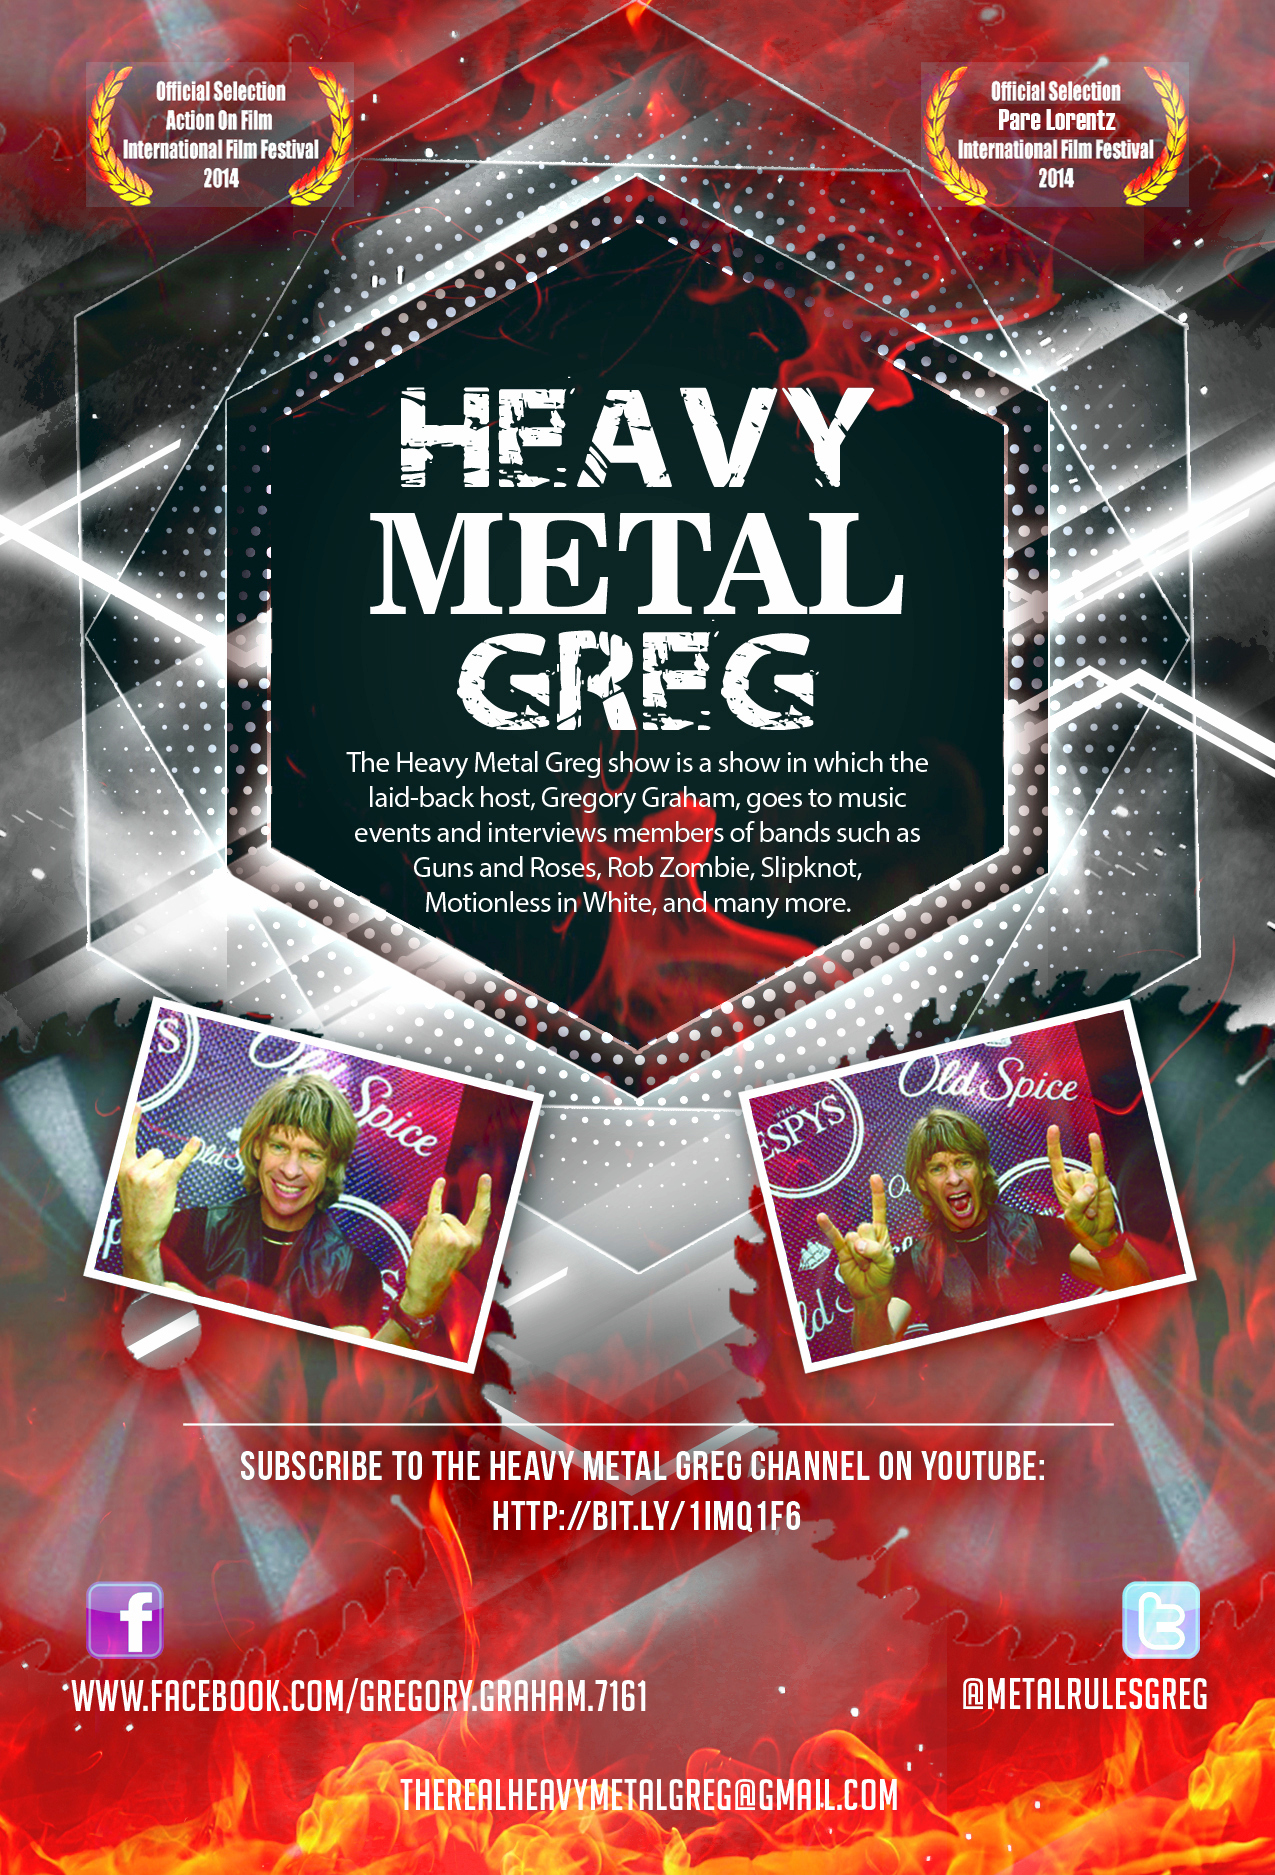 Heavy Metal Greg television show poster